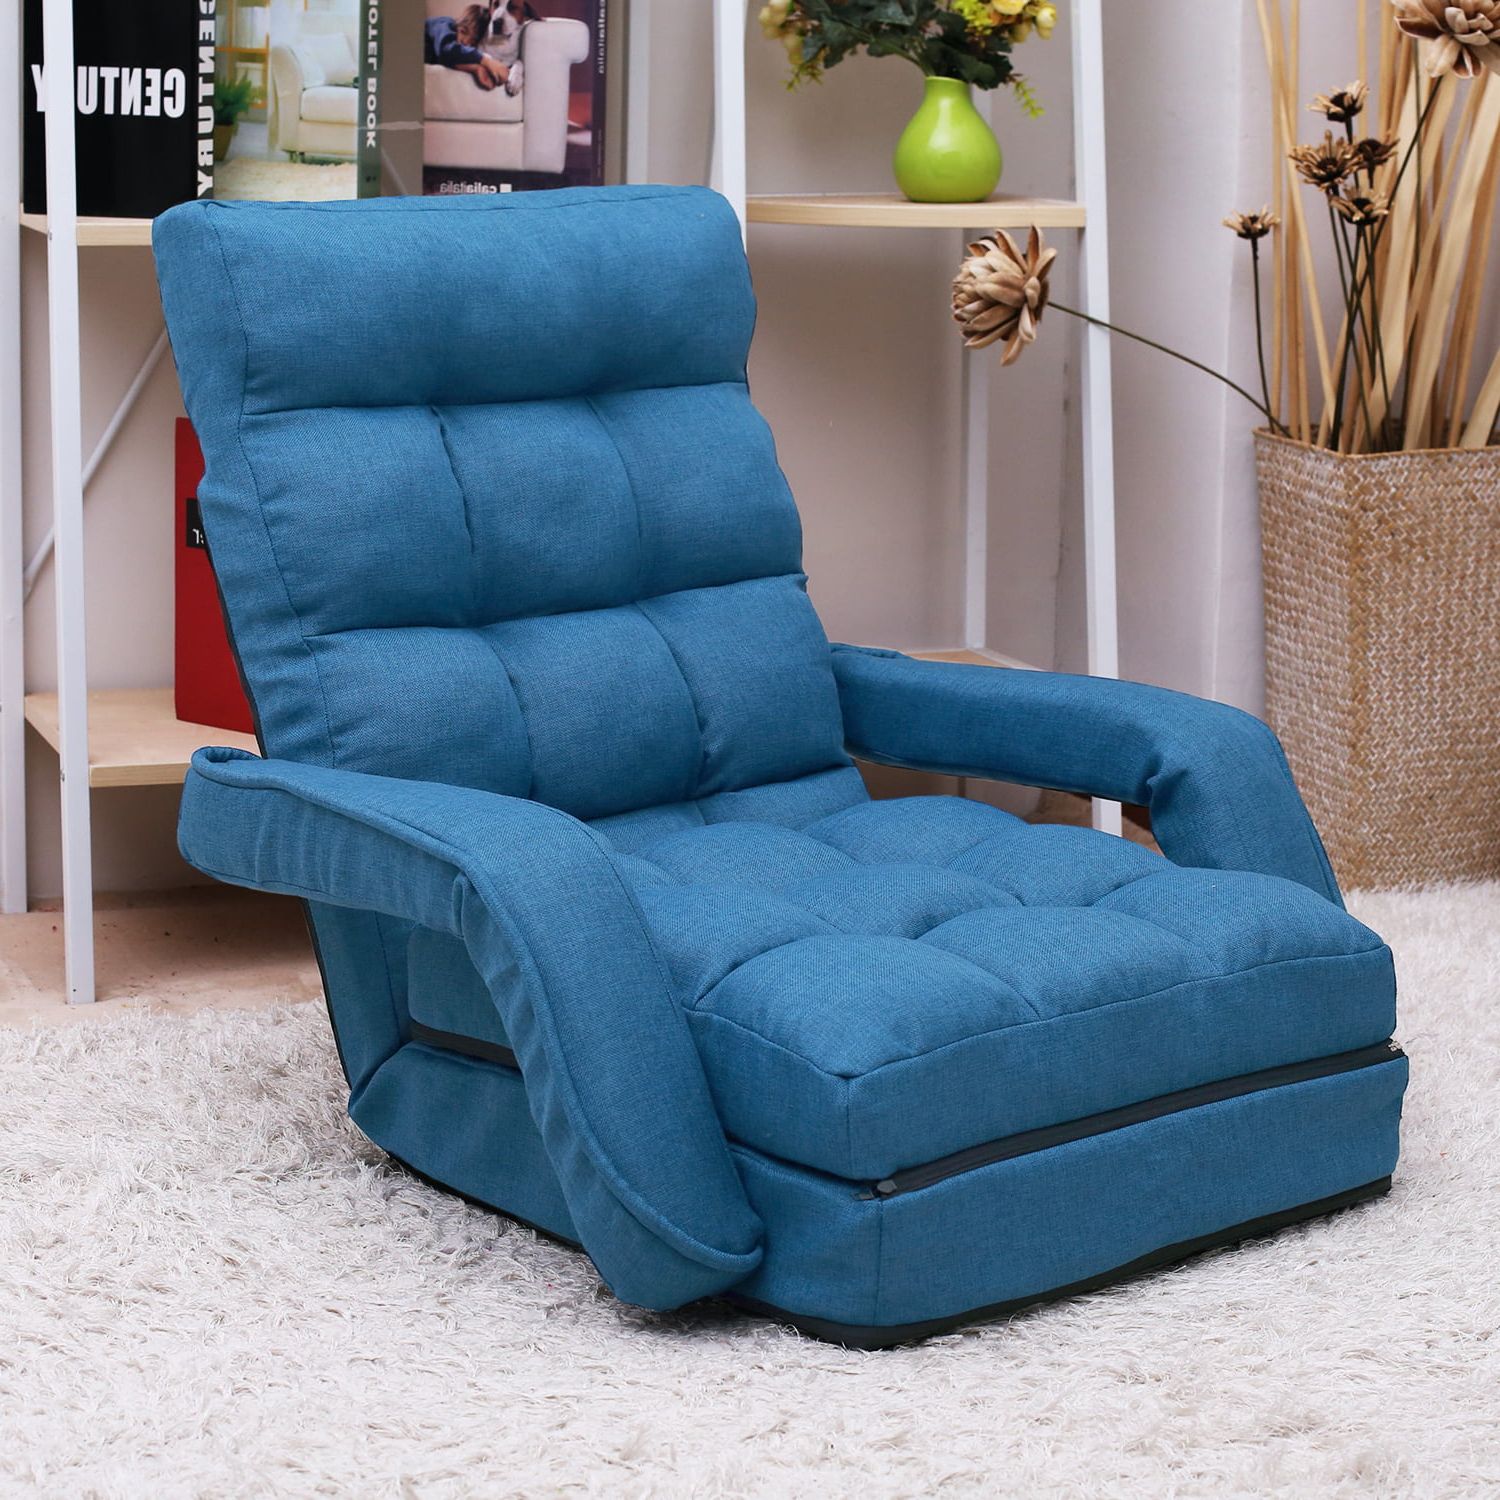 Furniture 2 In 1 Folding Lazy Sofa Lounger Floor Gaming Armchair Bed In 2 In 1 Foldable Sofas (Gallery 5 of 20)